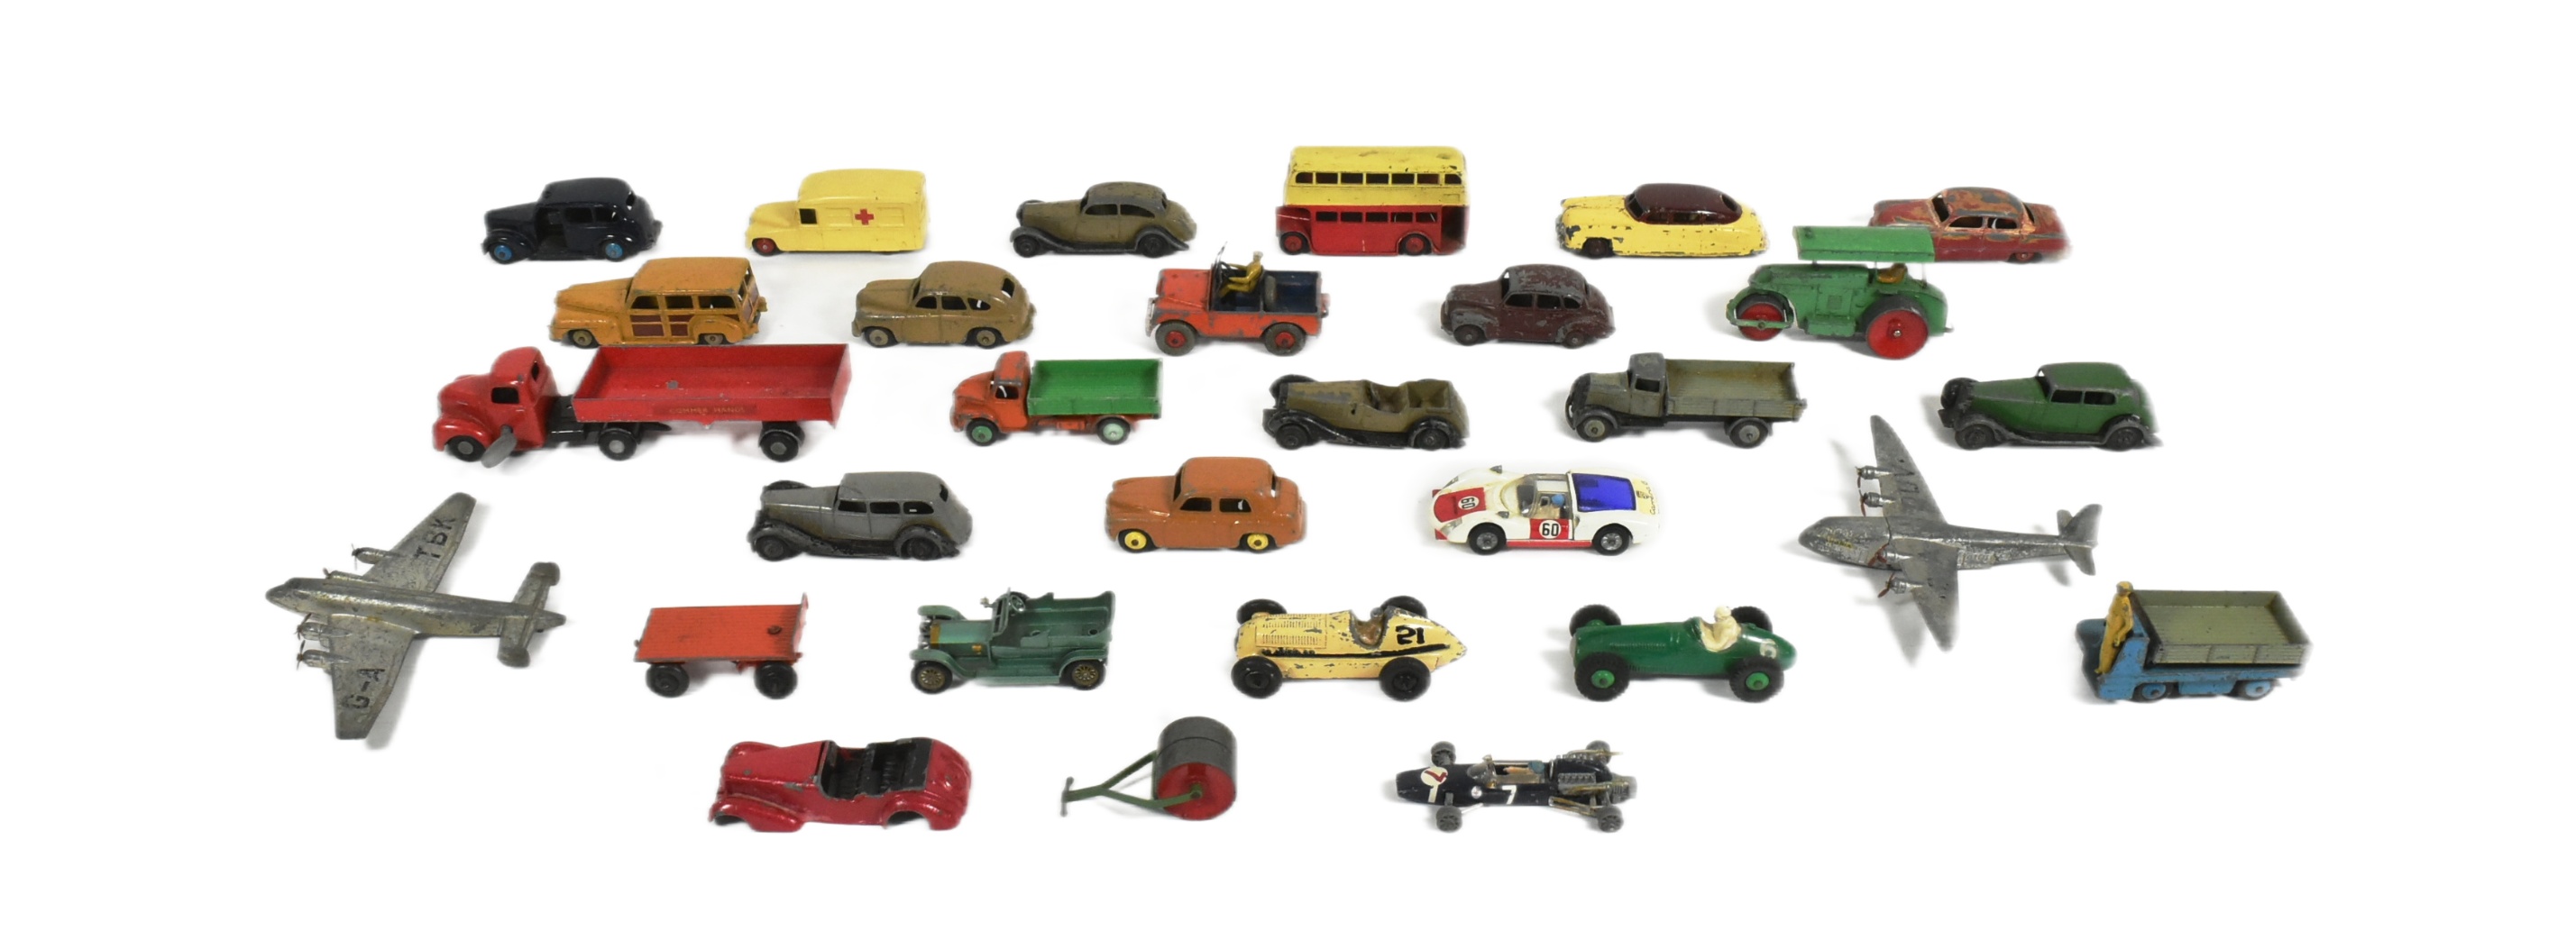 DIECAST - COLLECTION OF VINTAGE DINKY TOYS